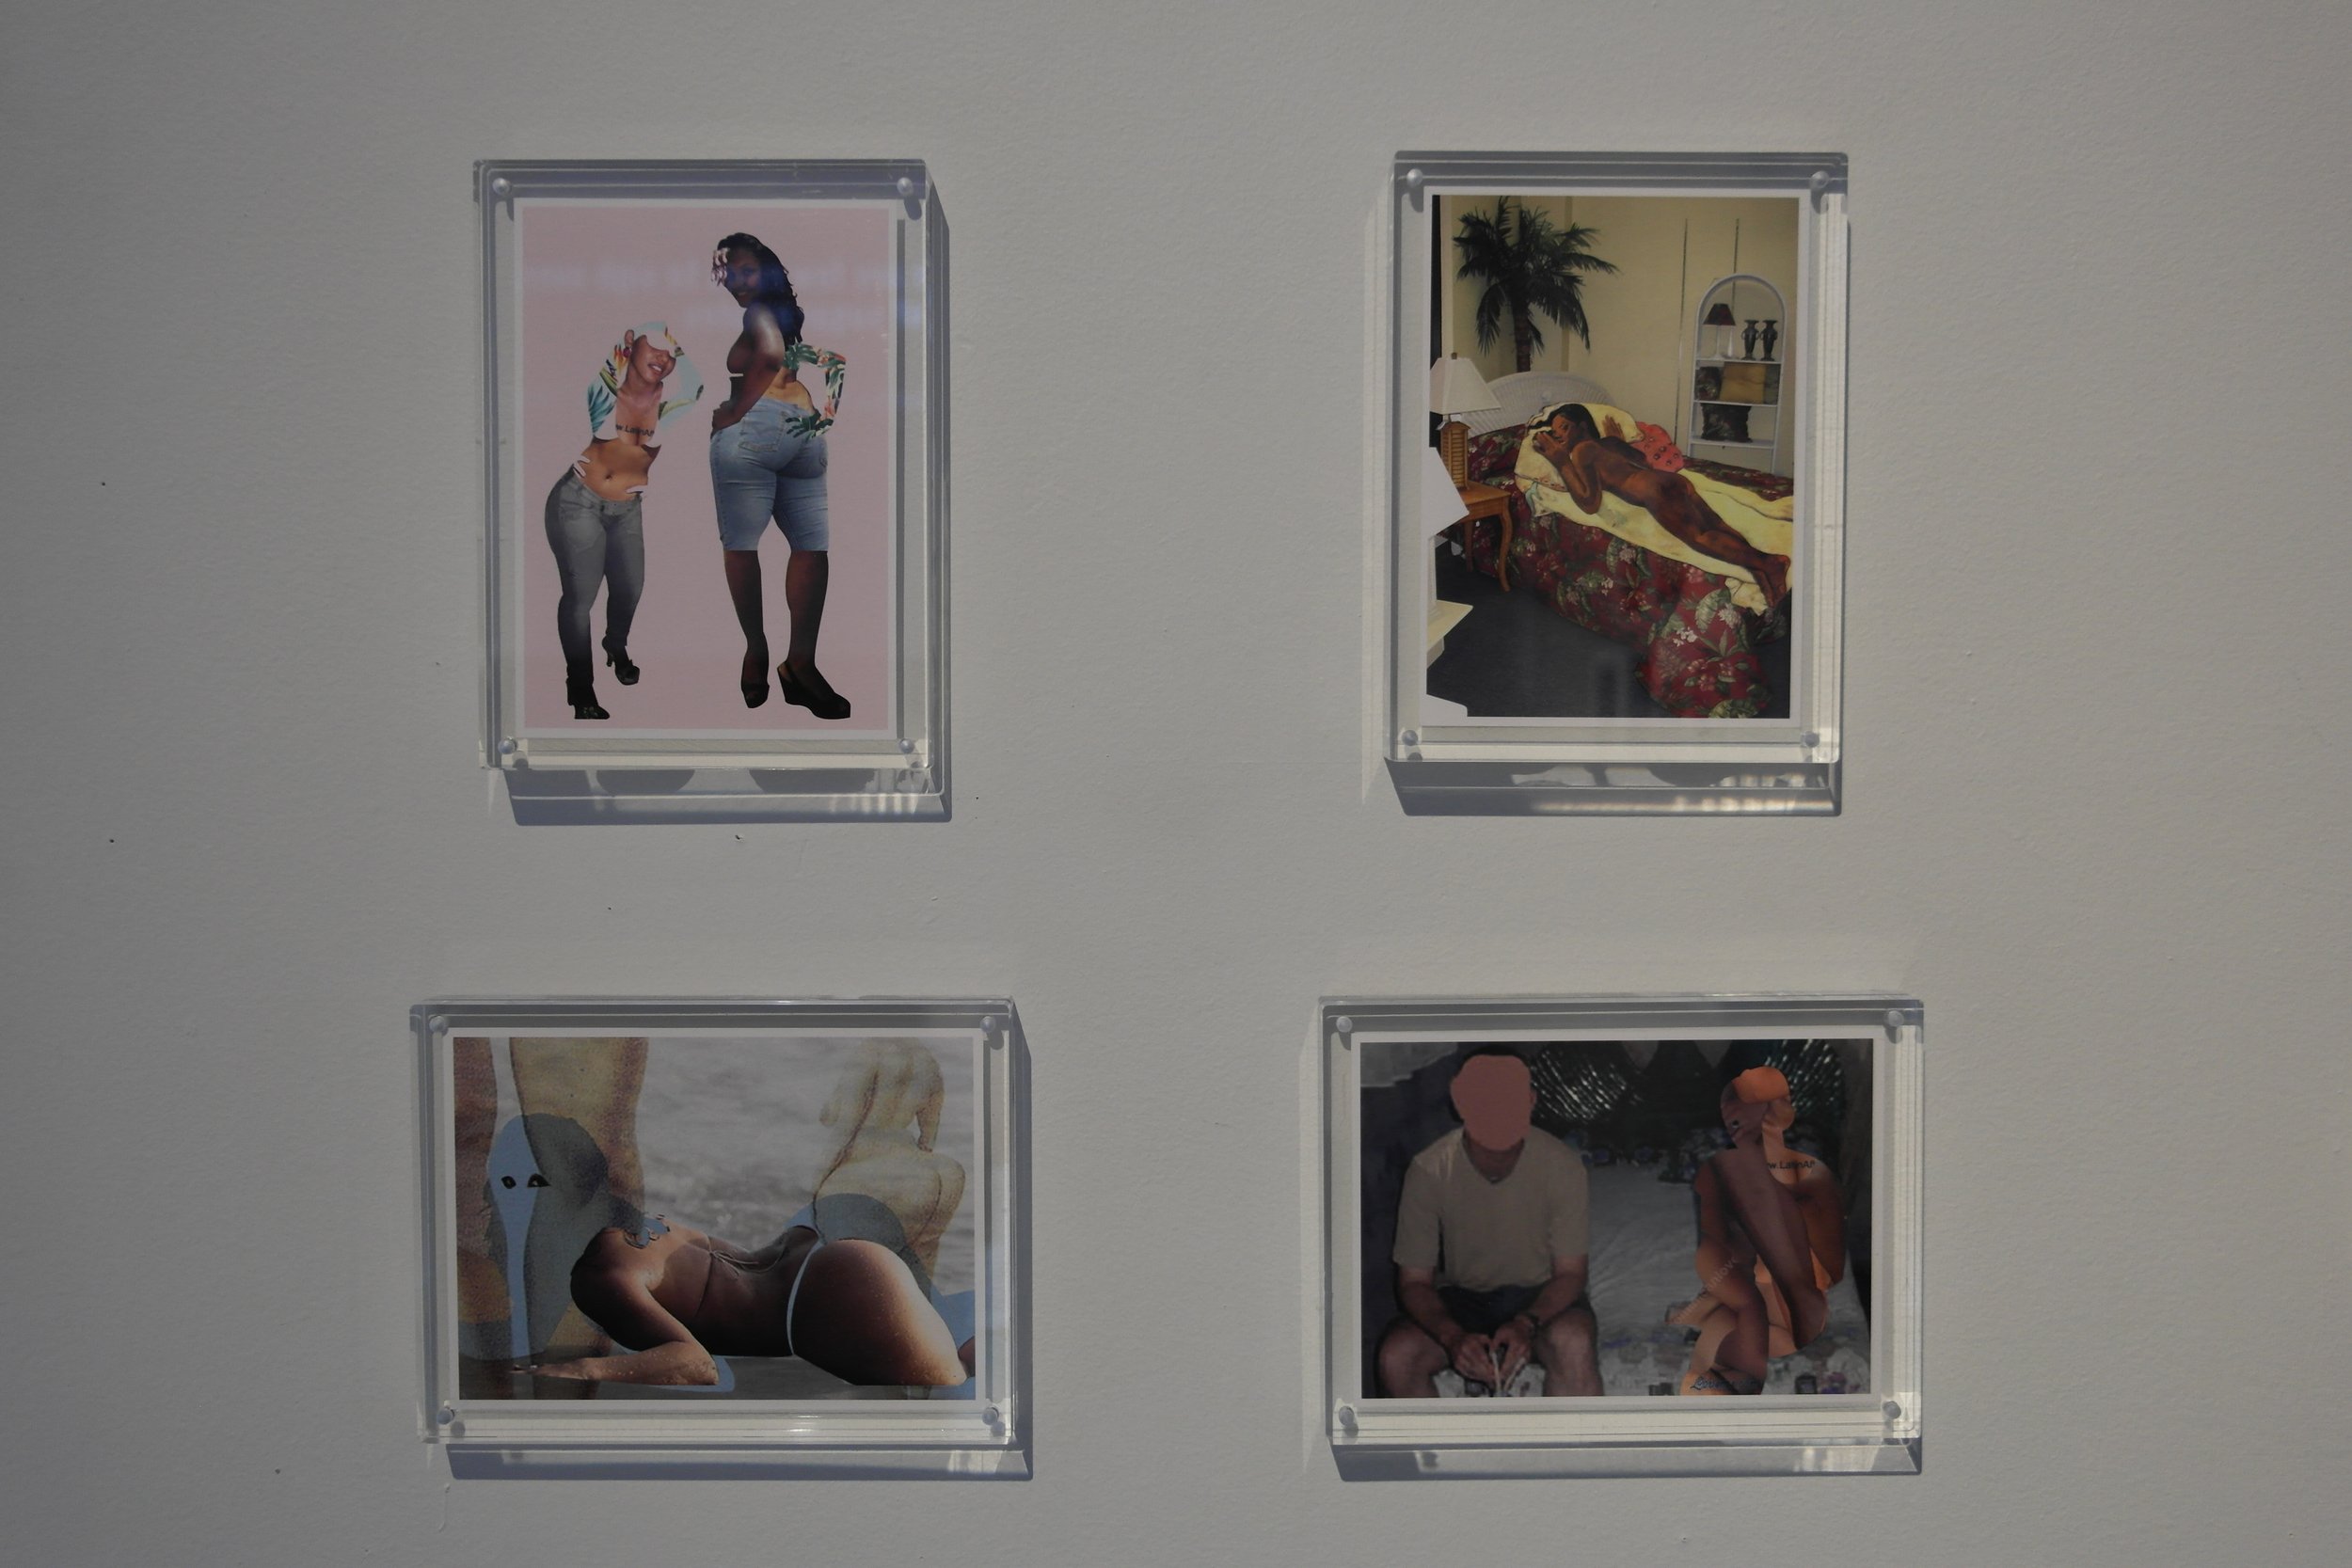 Gallery view of Joiri Minaya’s Postcard Series, 2015. Archival prints on paper, 5 x 7 inches. Courtesy of the artist.